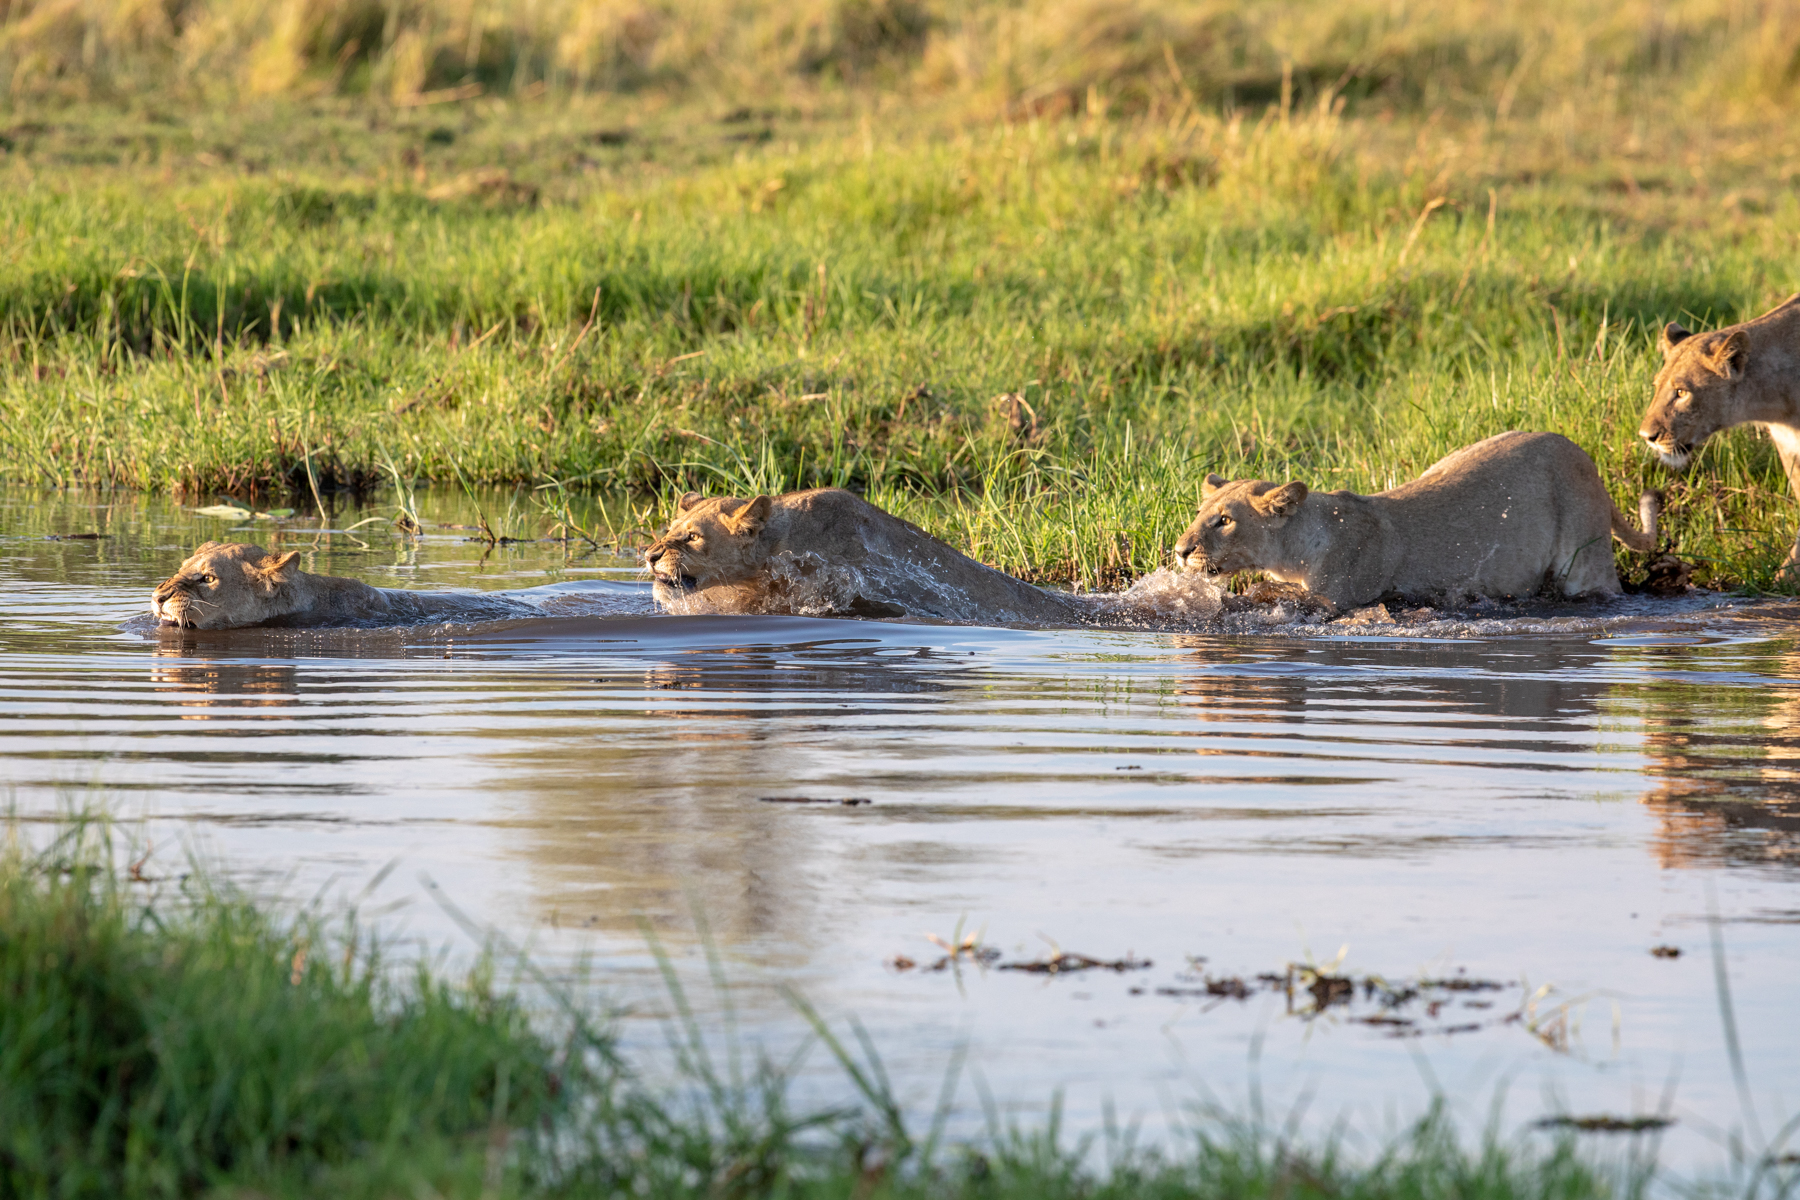 Follow my leader: lionesses crossing a river